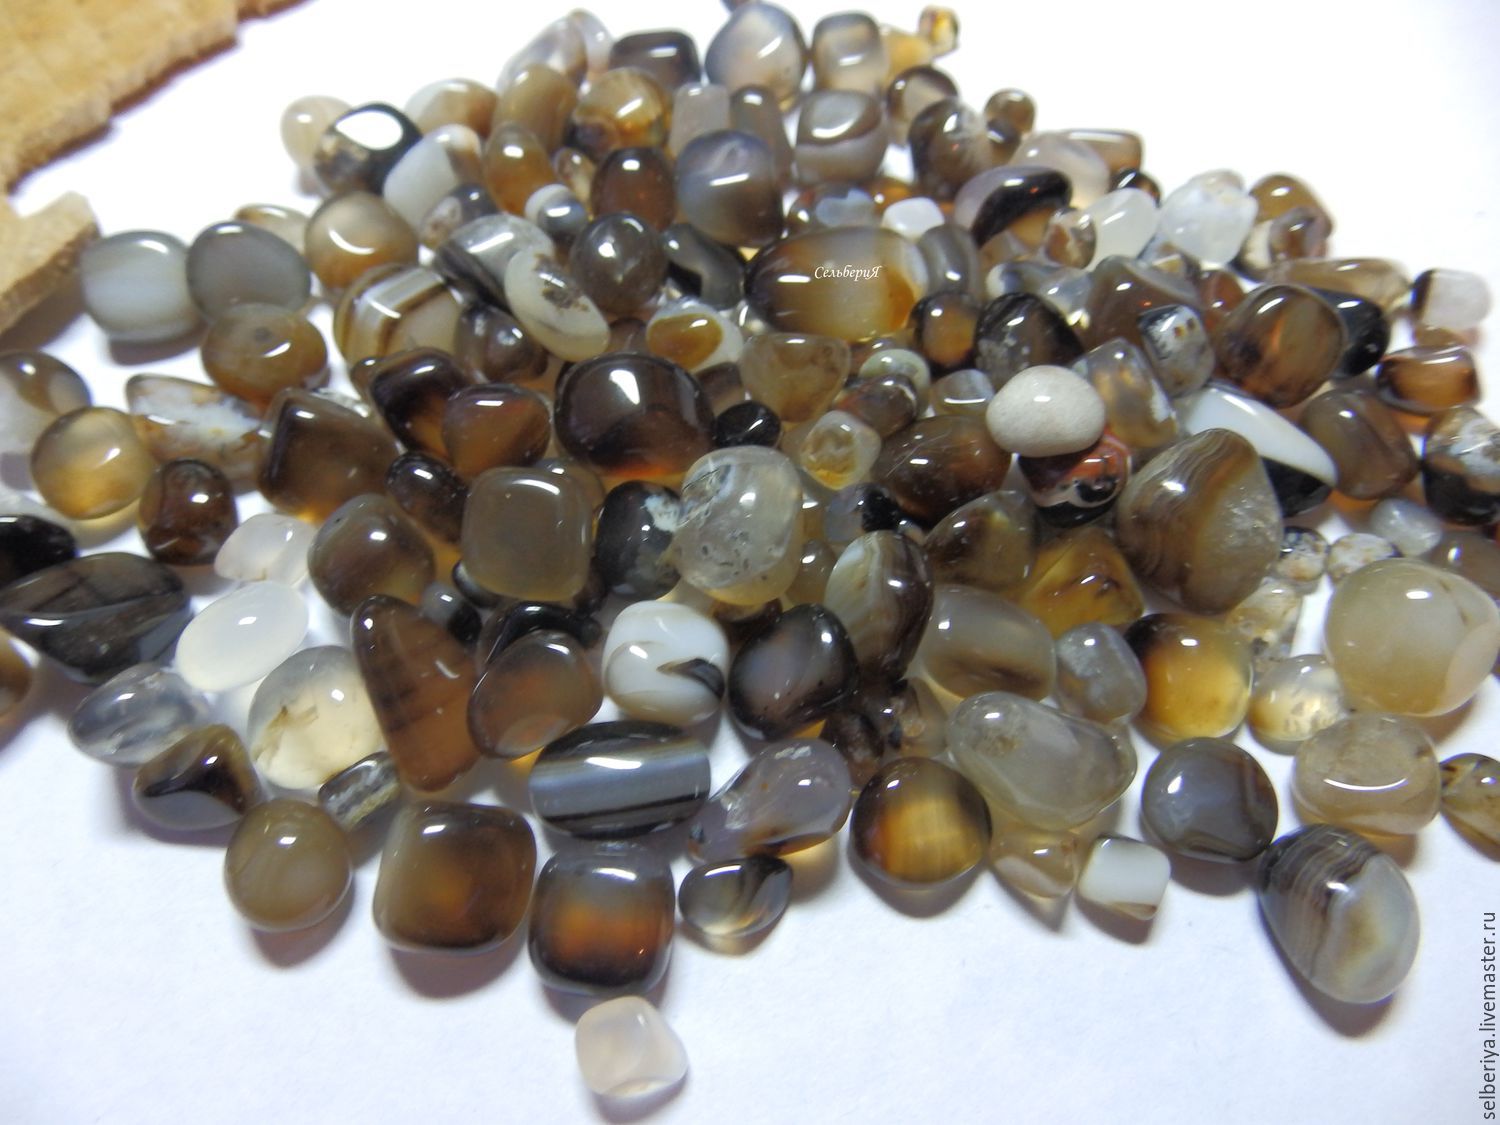 Smoky agate Stone chippings, tumbling 